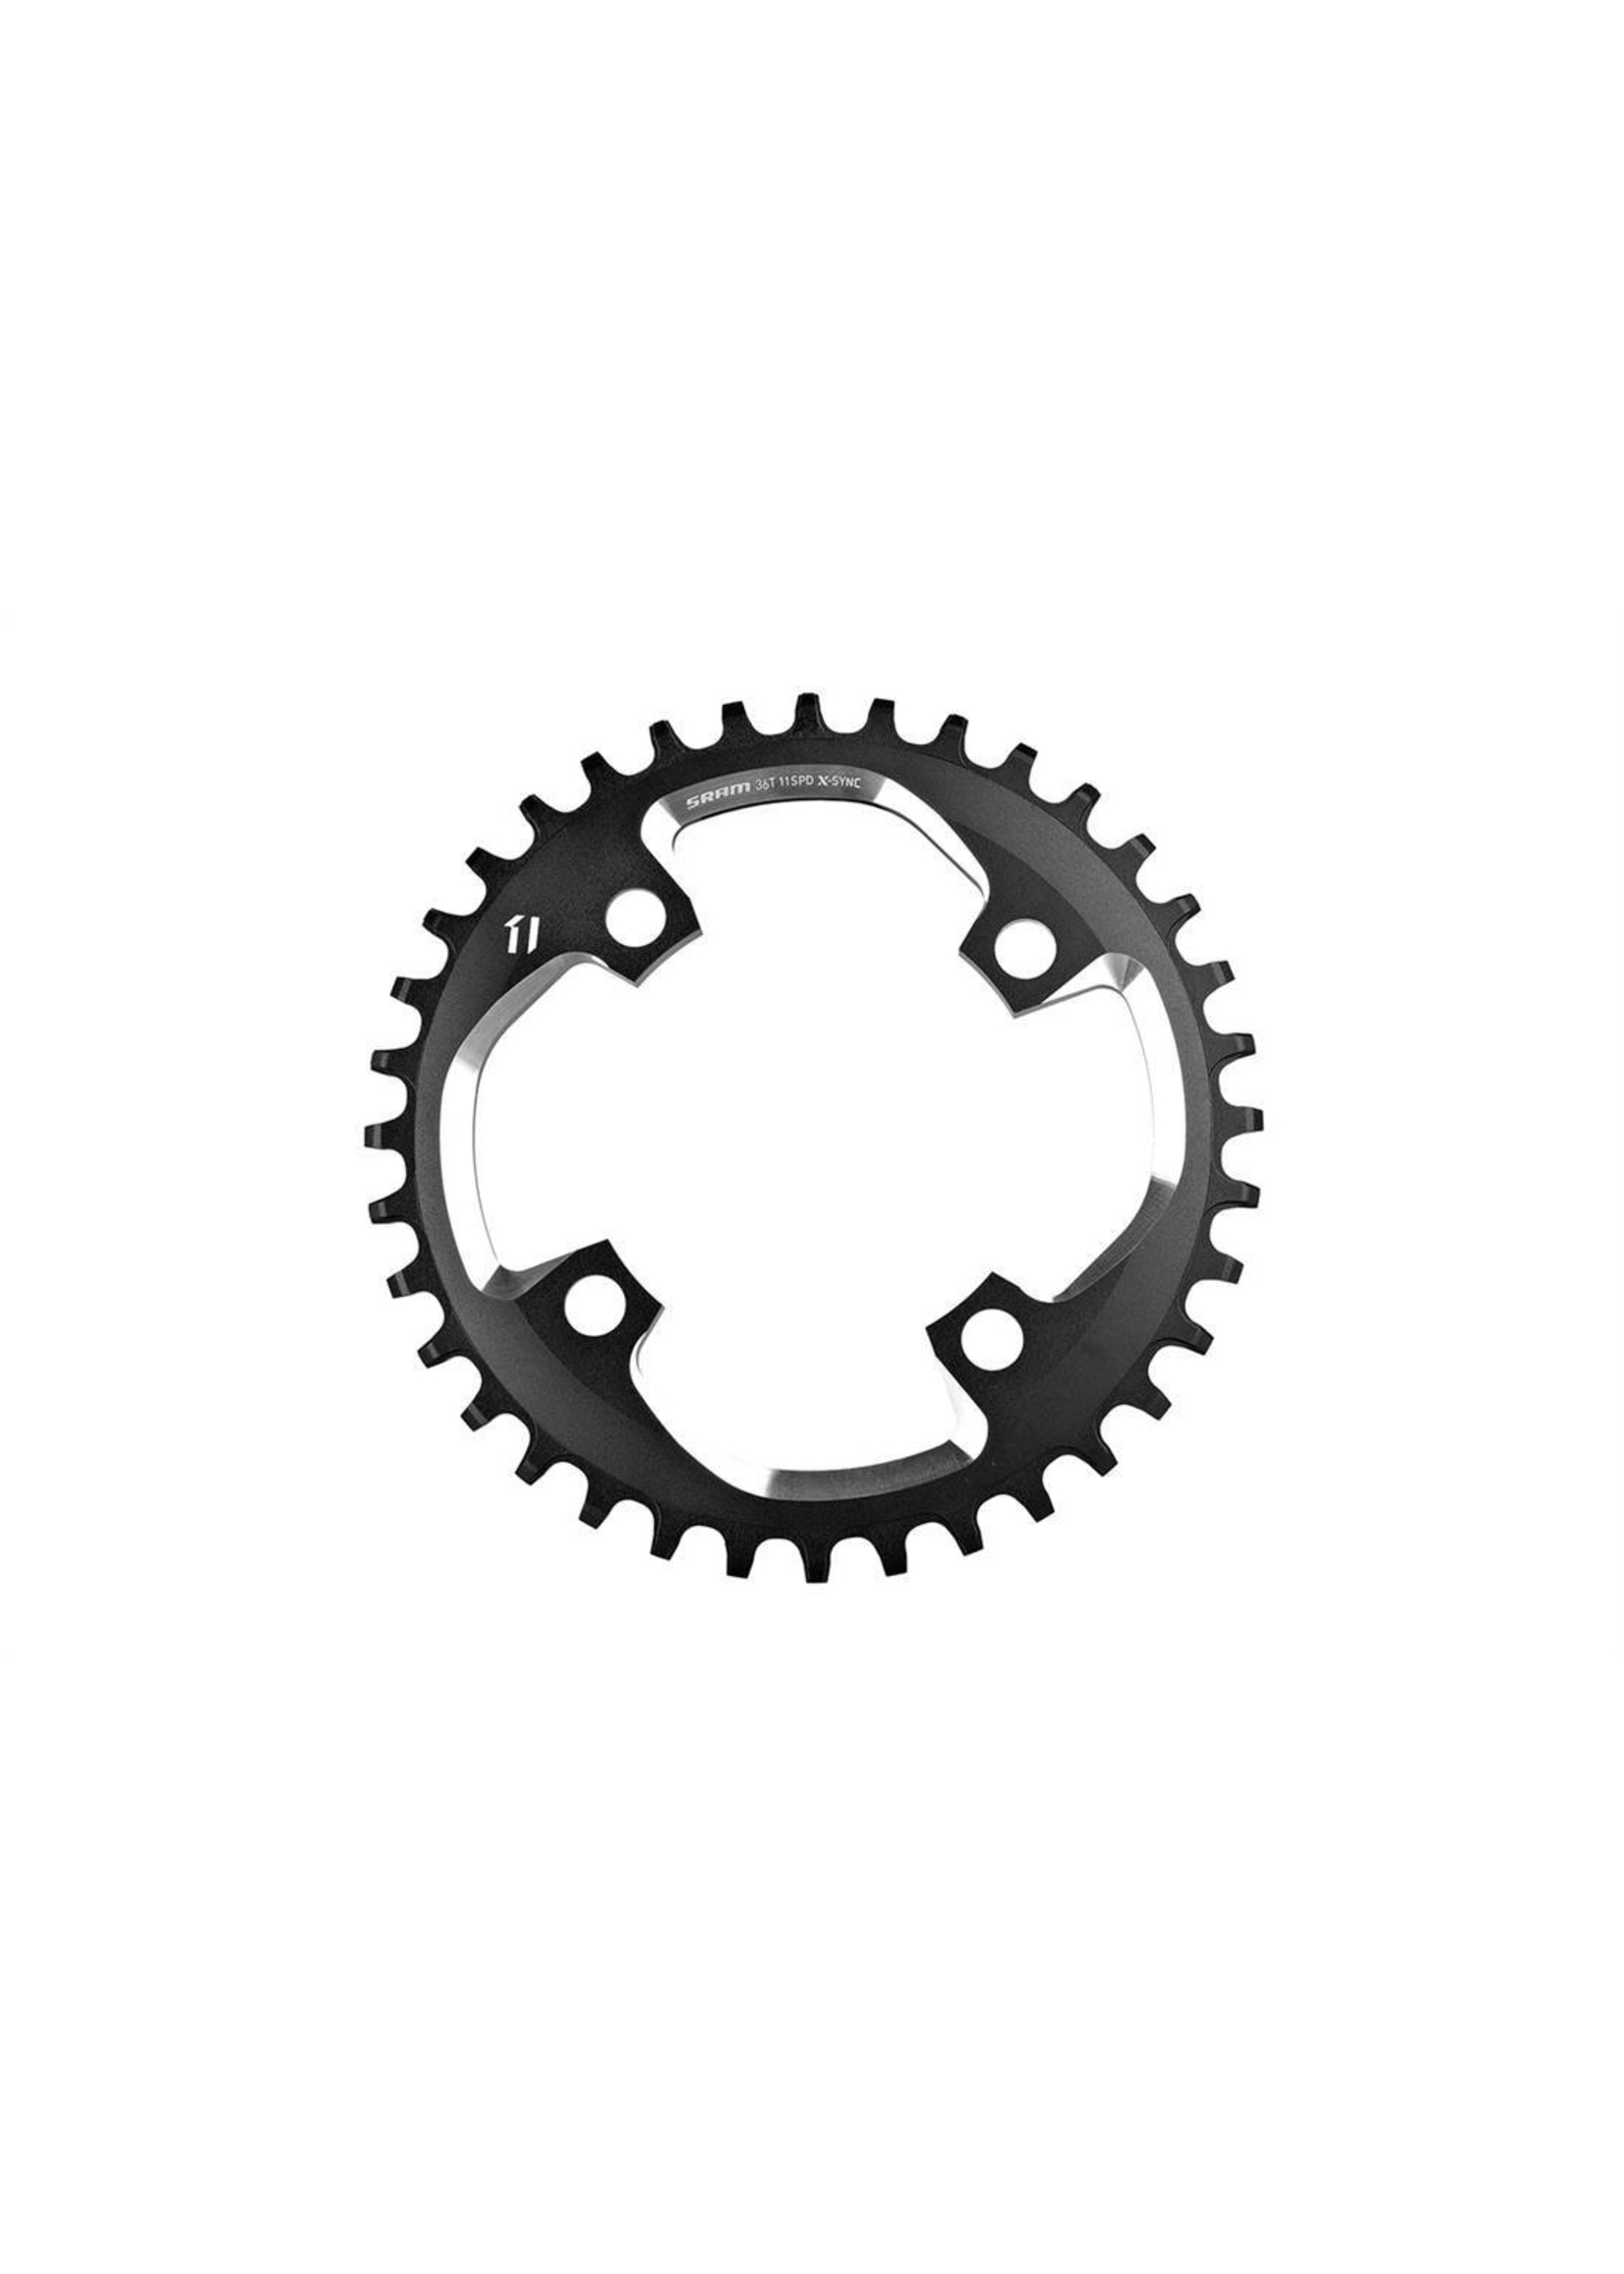 SRAM SRAM X01 X-Sync 36 Tooth 94mm BCD 4-Bolt Chainring fits 10 and 11 Speed SRAM Chains